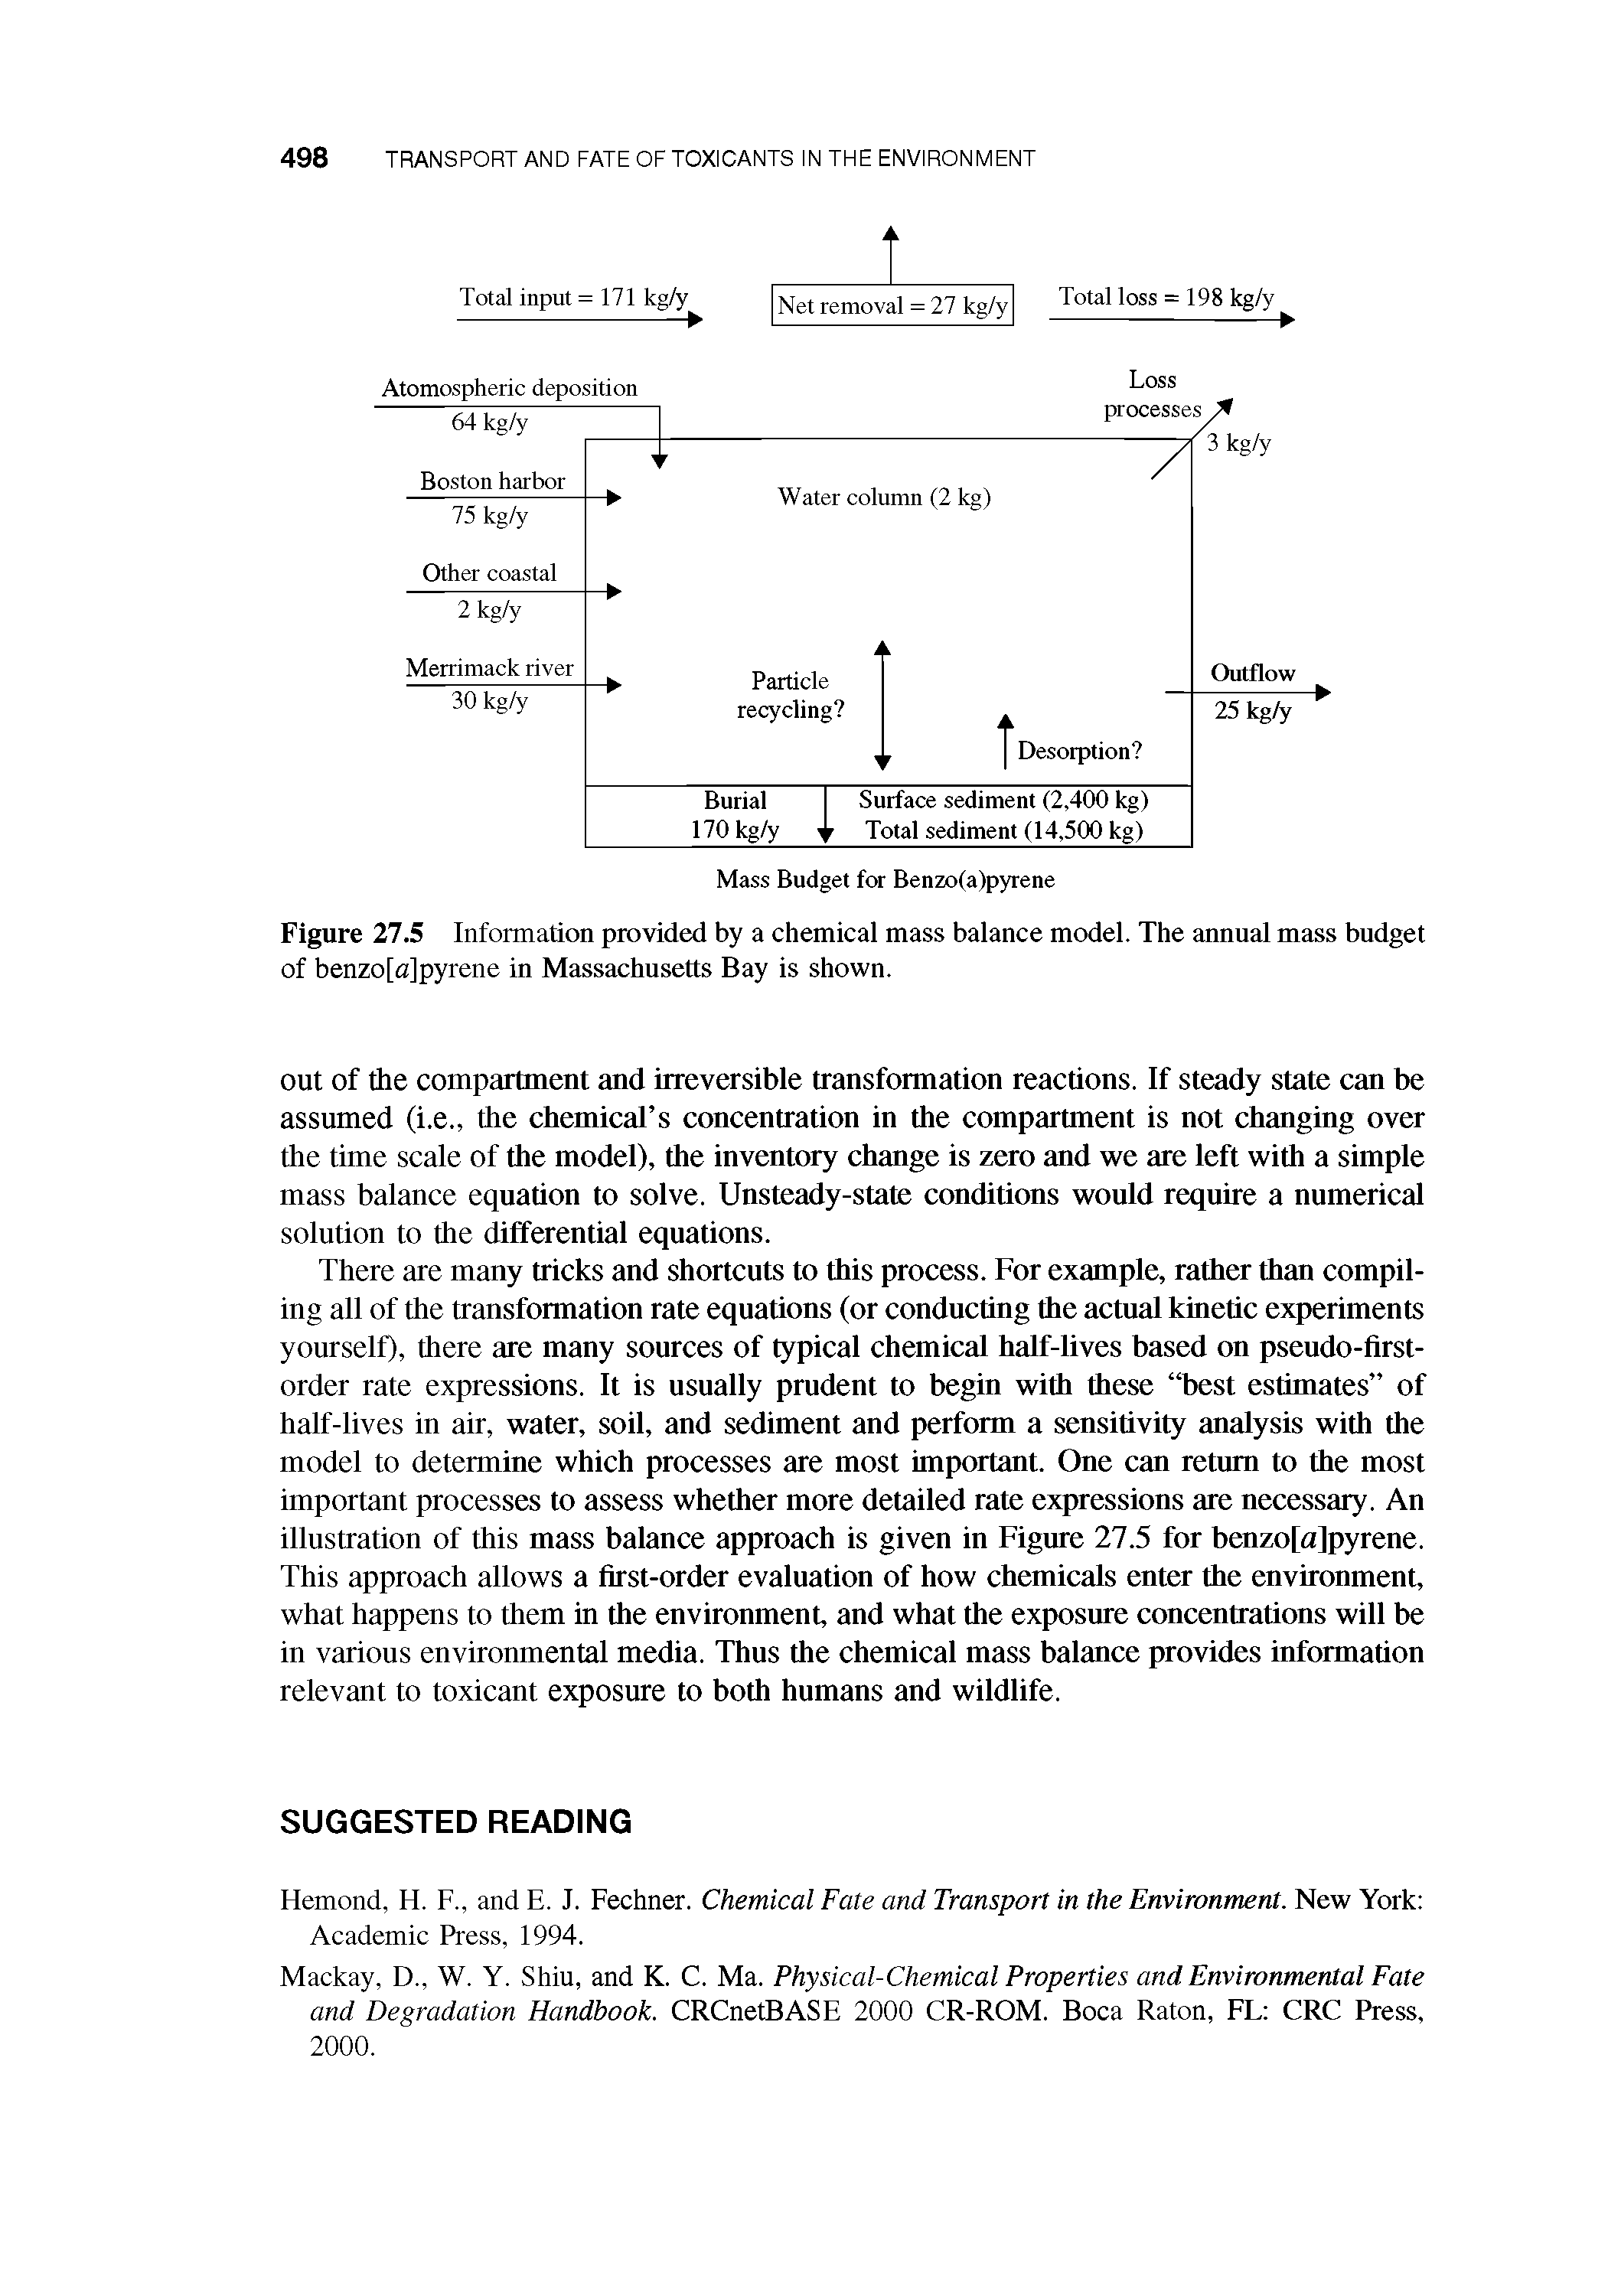 Figure 27.5 Information provided by a chemical mass balance model. The annual mass budget of benzo[a]pyrene in Massachusetts Bay is shown.